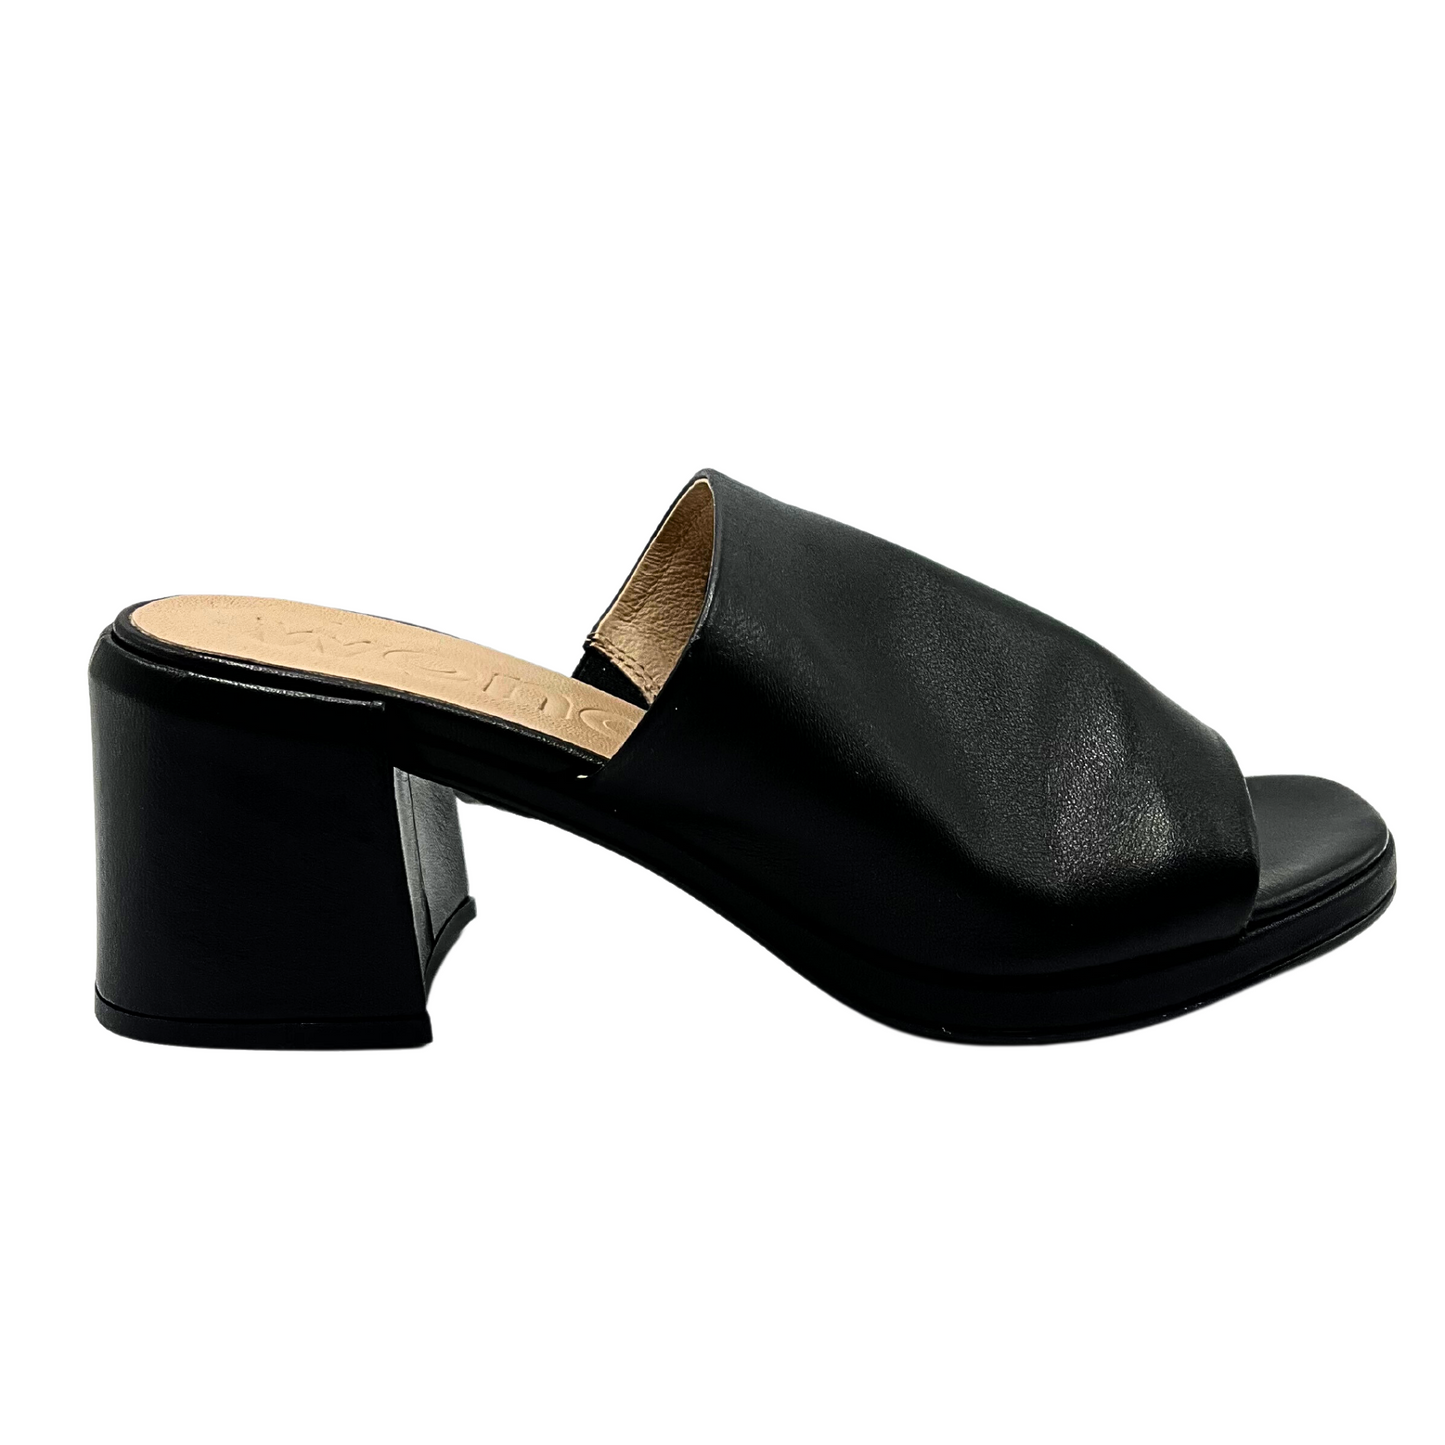 Outside view of black leather mule.  Square block heel wrapped in same leather.